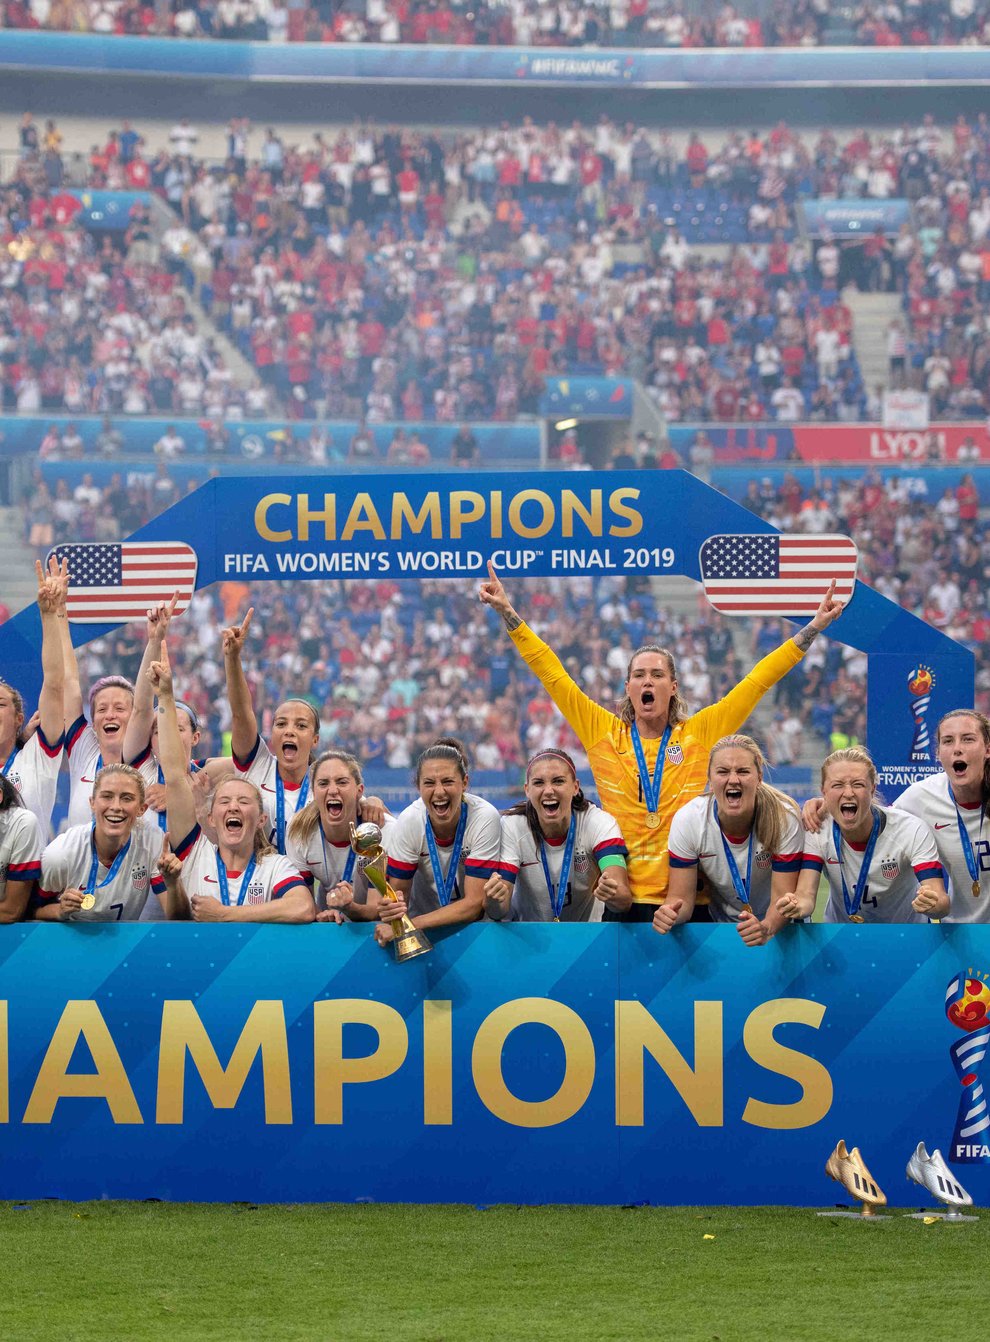 The US women's soccer team have been fighting for equal pay since before they retained the World Cup last year